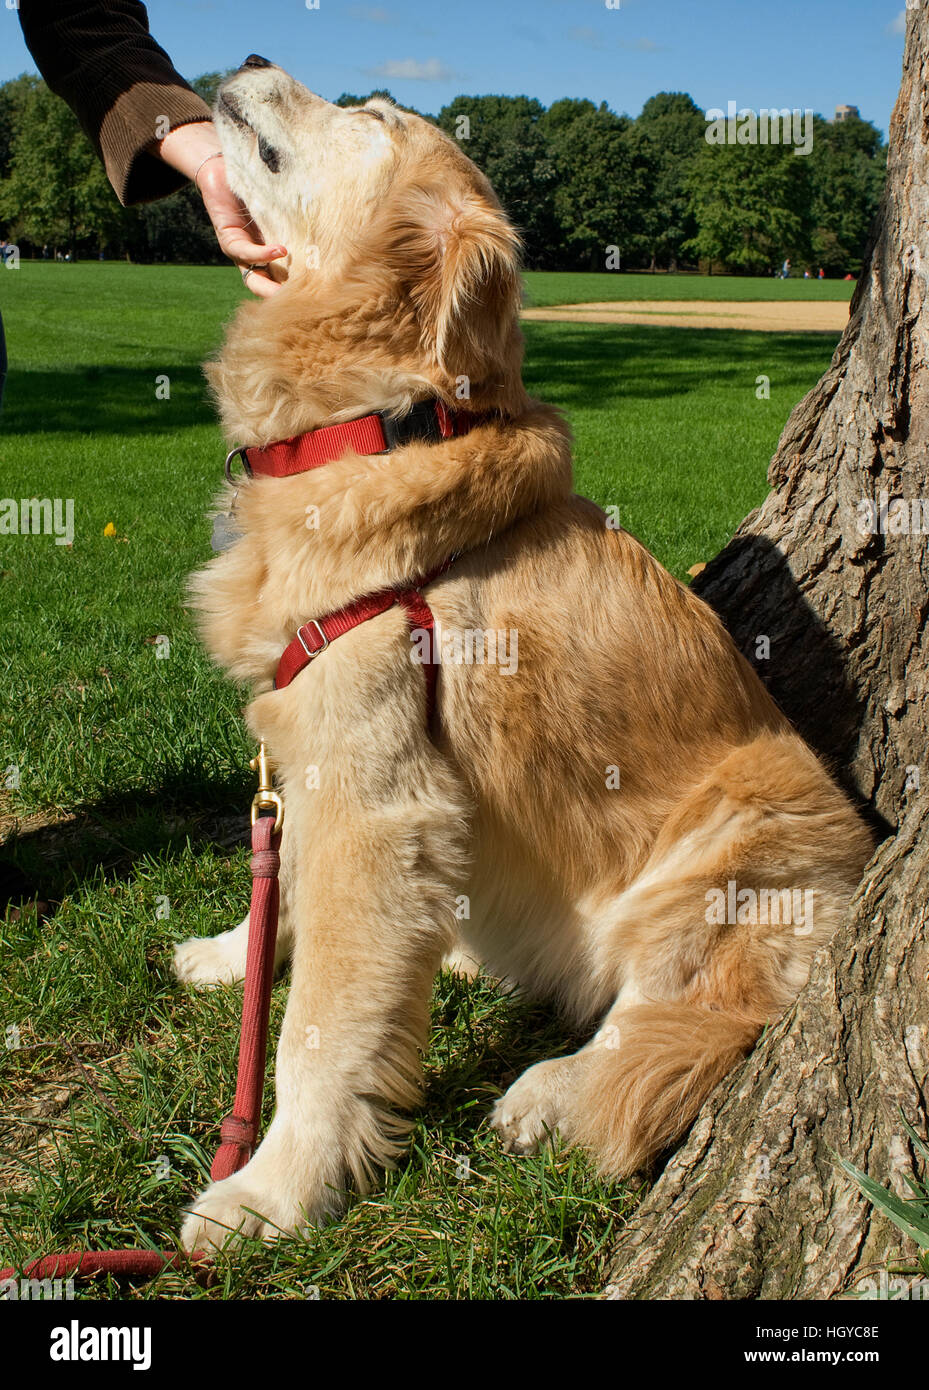 a golden retriever in Central park being pet by it's owner Stock Photo